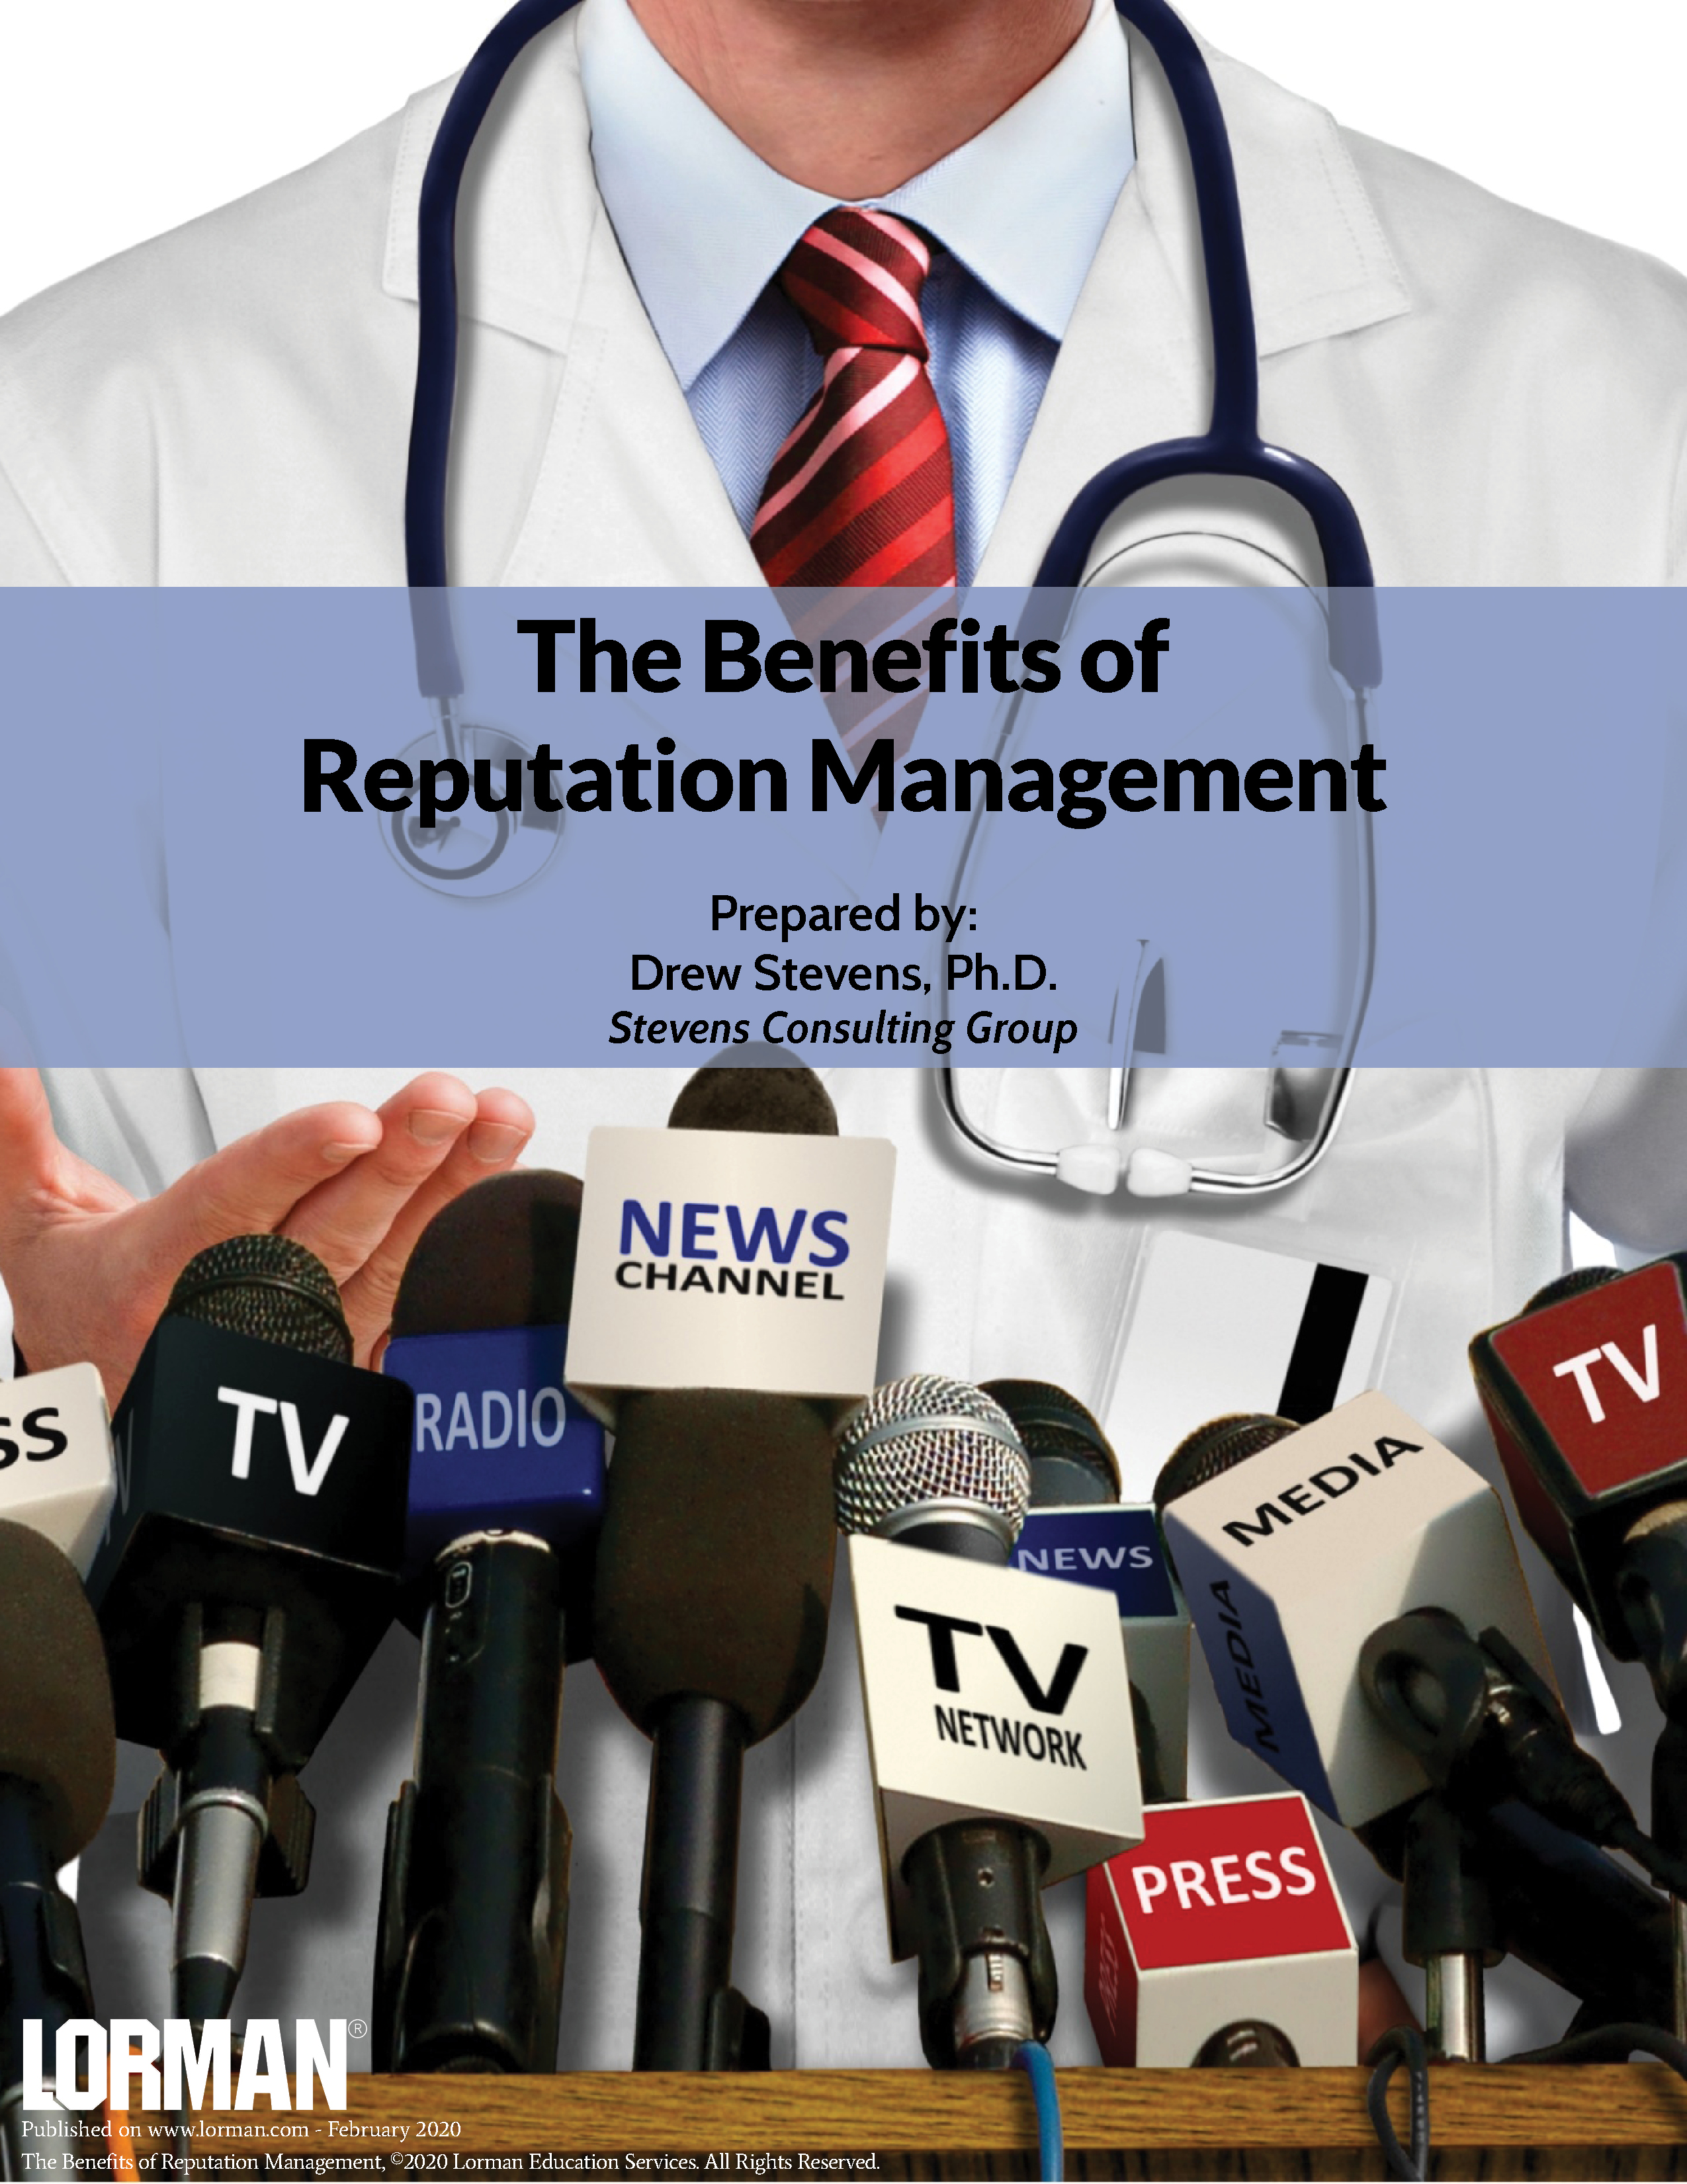 The Benefits of Reputation Management